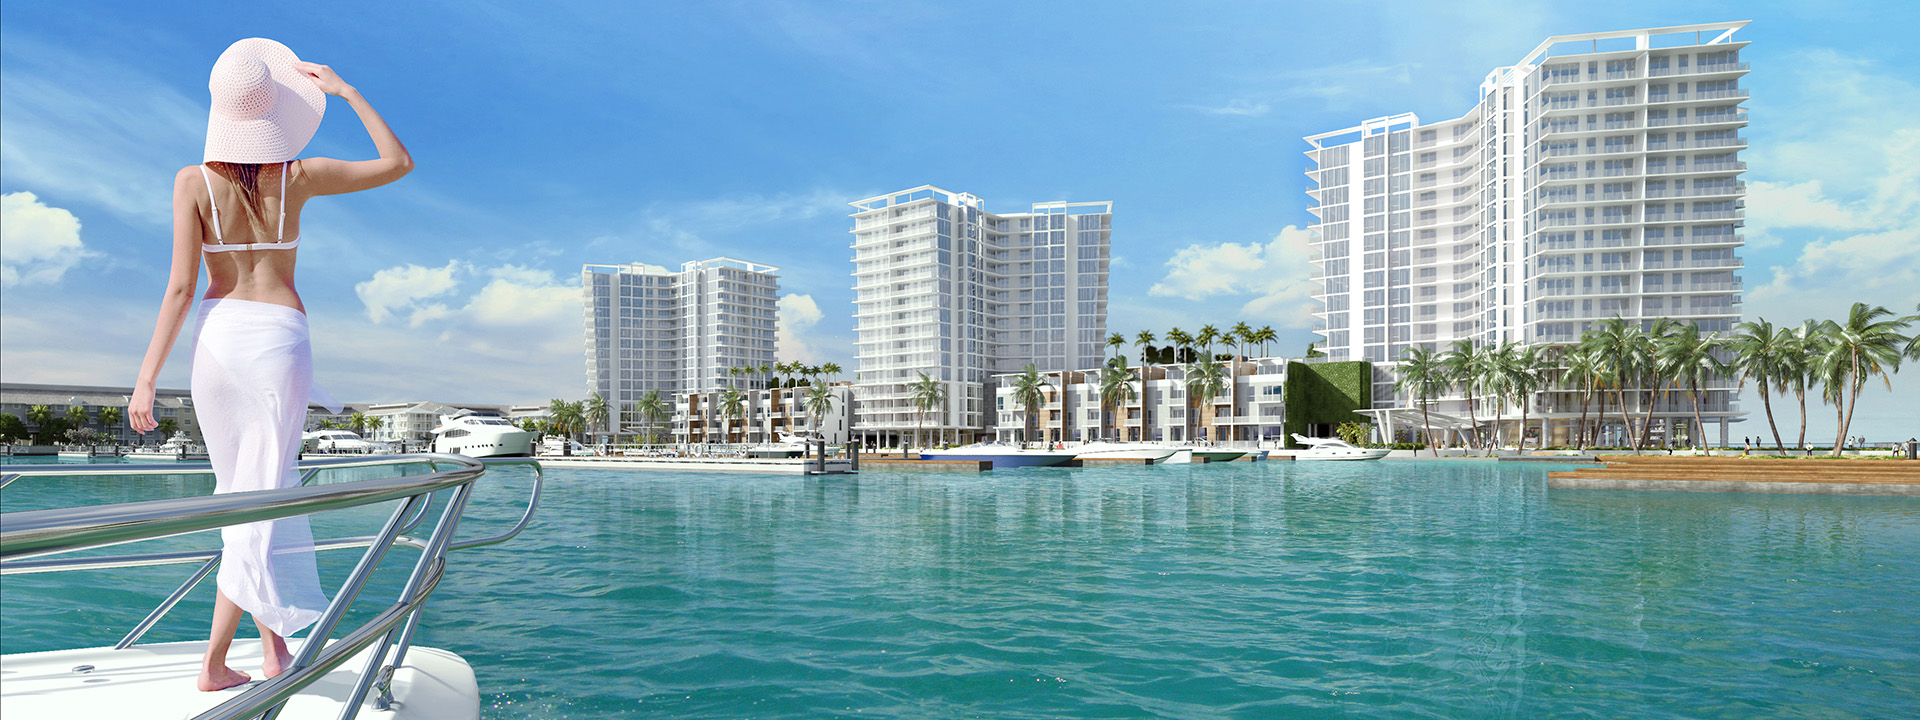 Find Your Vacation Lifestyle at Marina Pointe